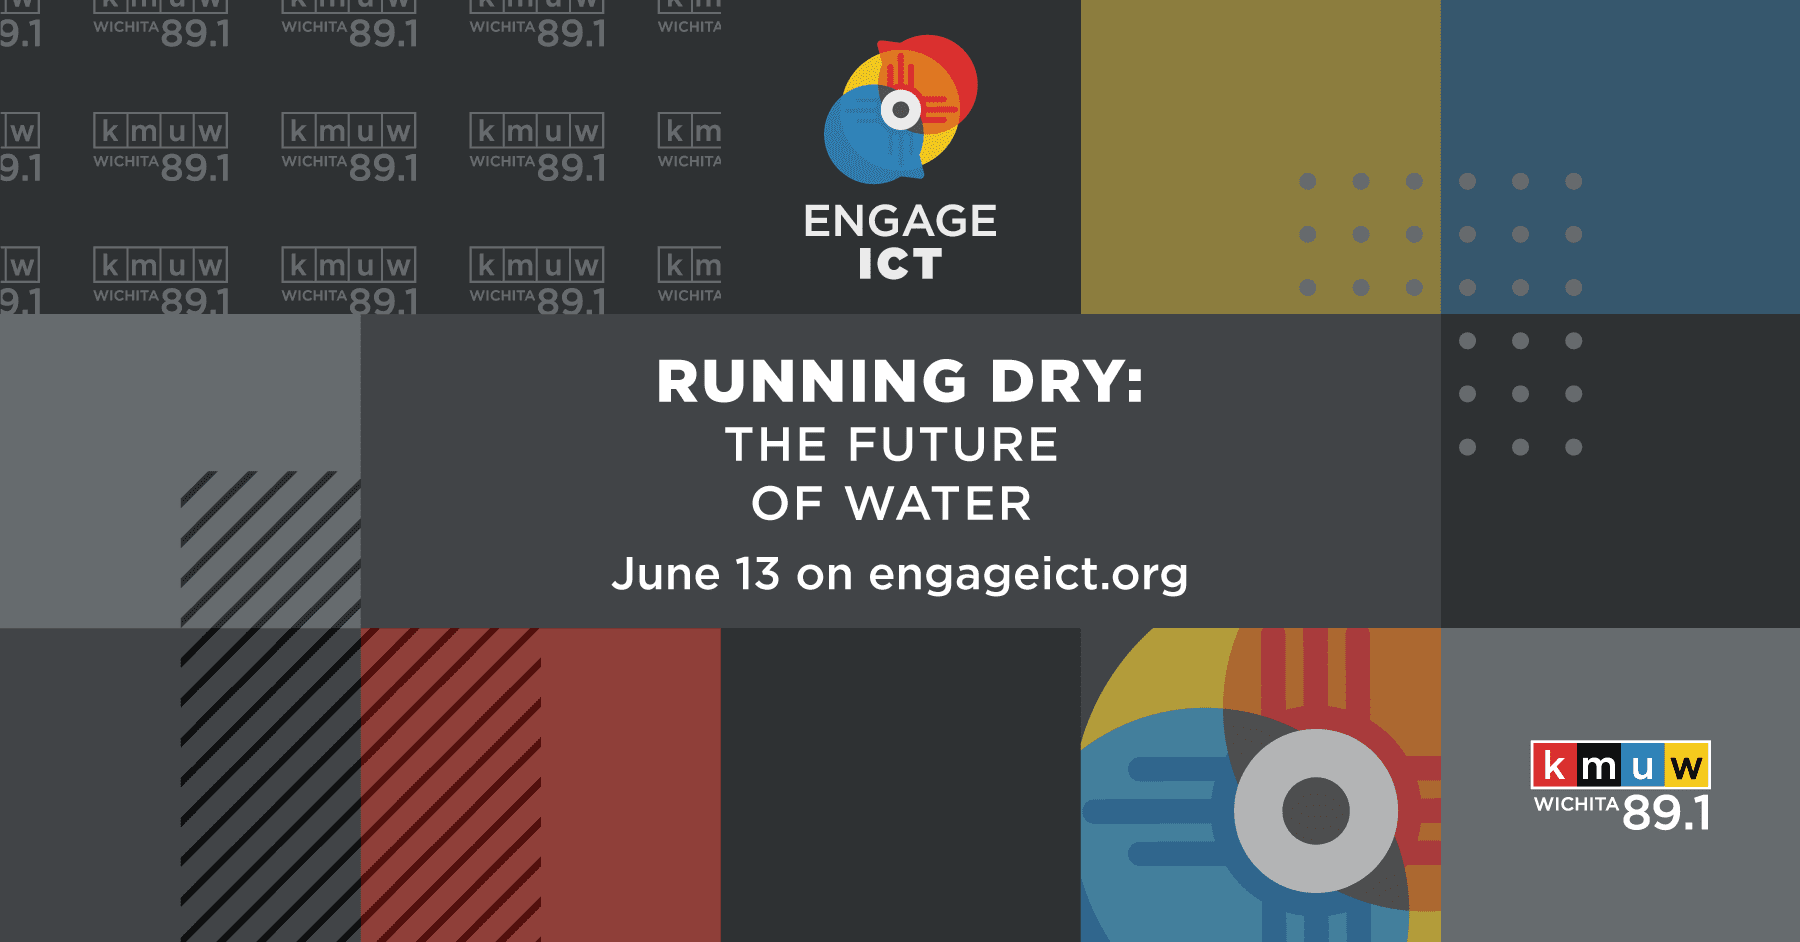 Graphic with the text, "Running Dry: The Future of Water. June 13 on engageict.org" and the KMUW logo.